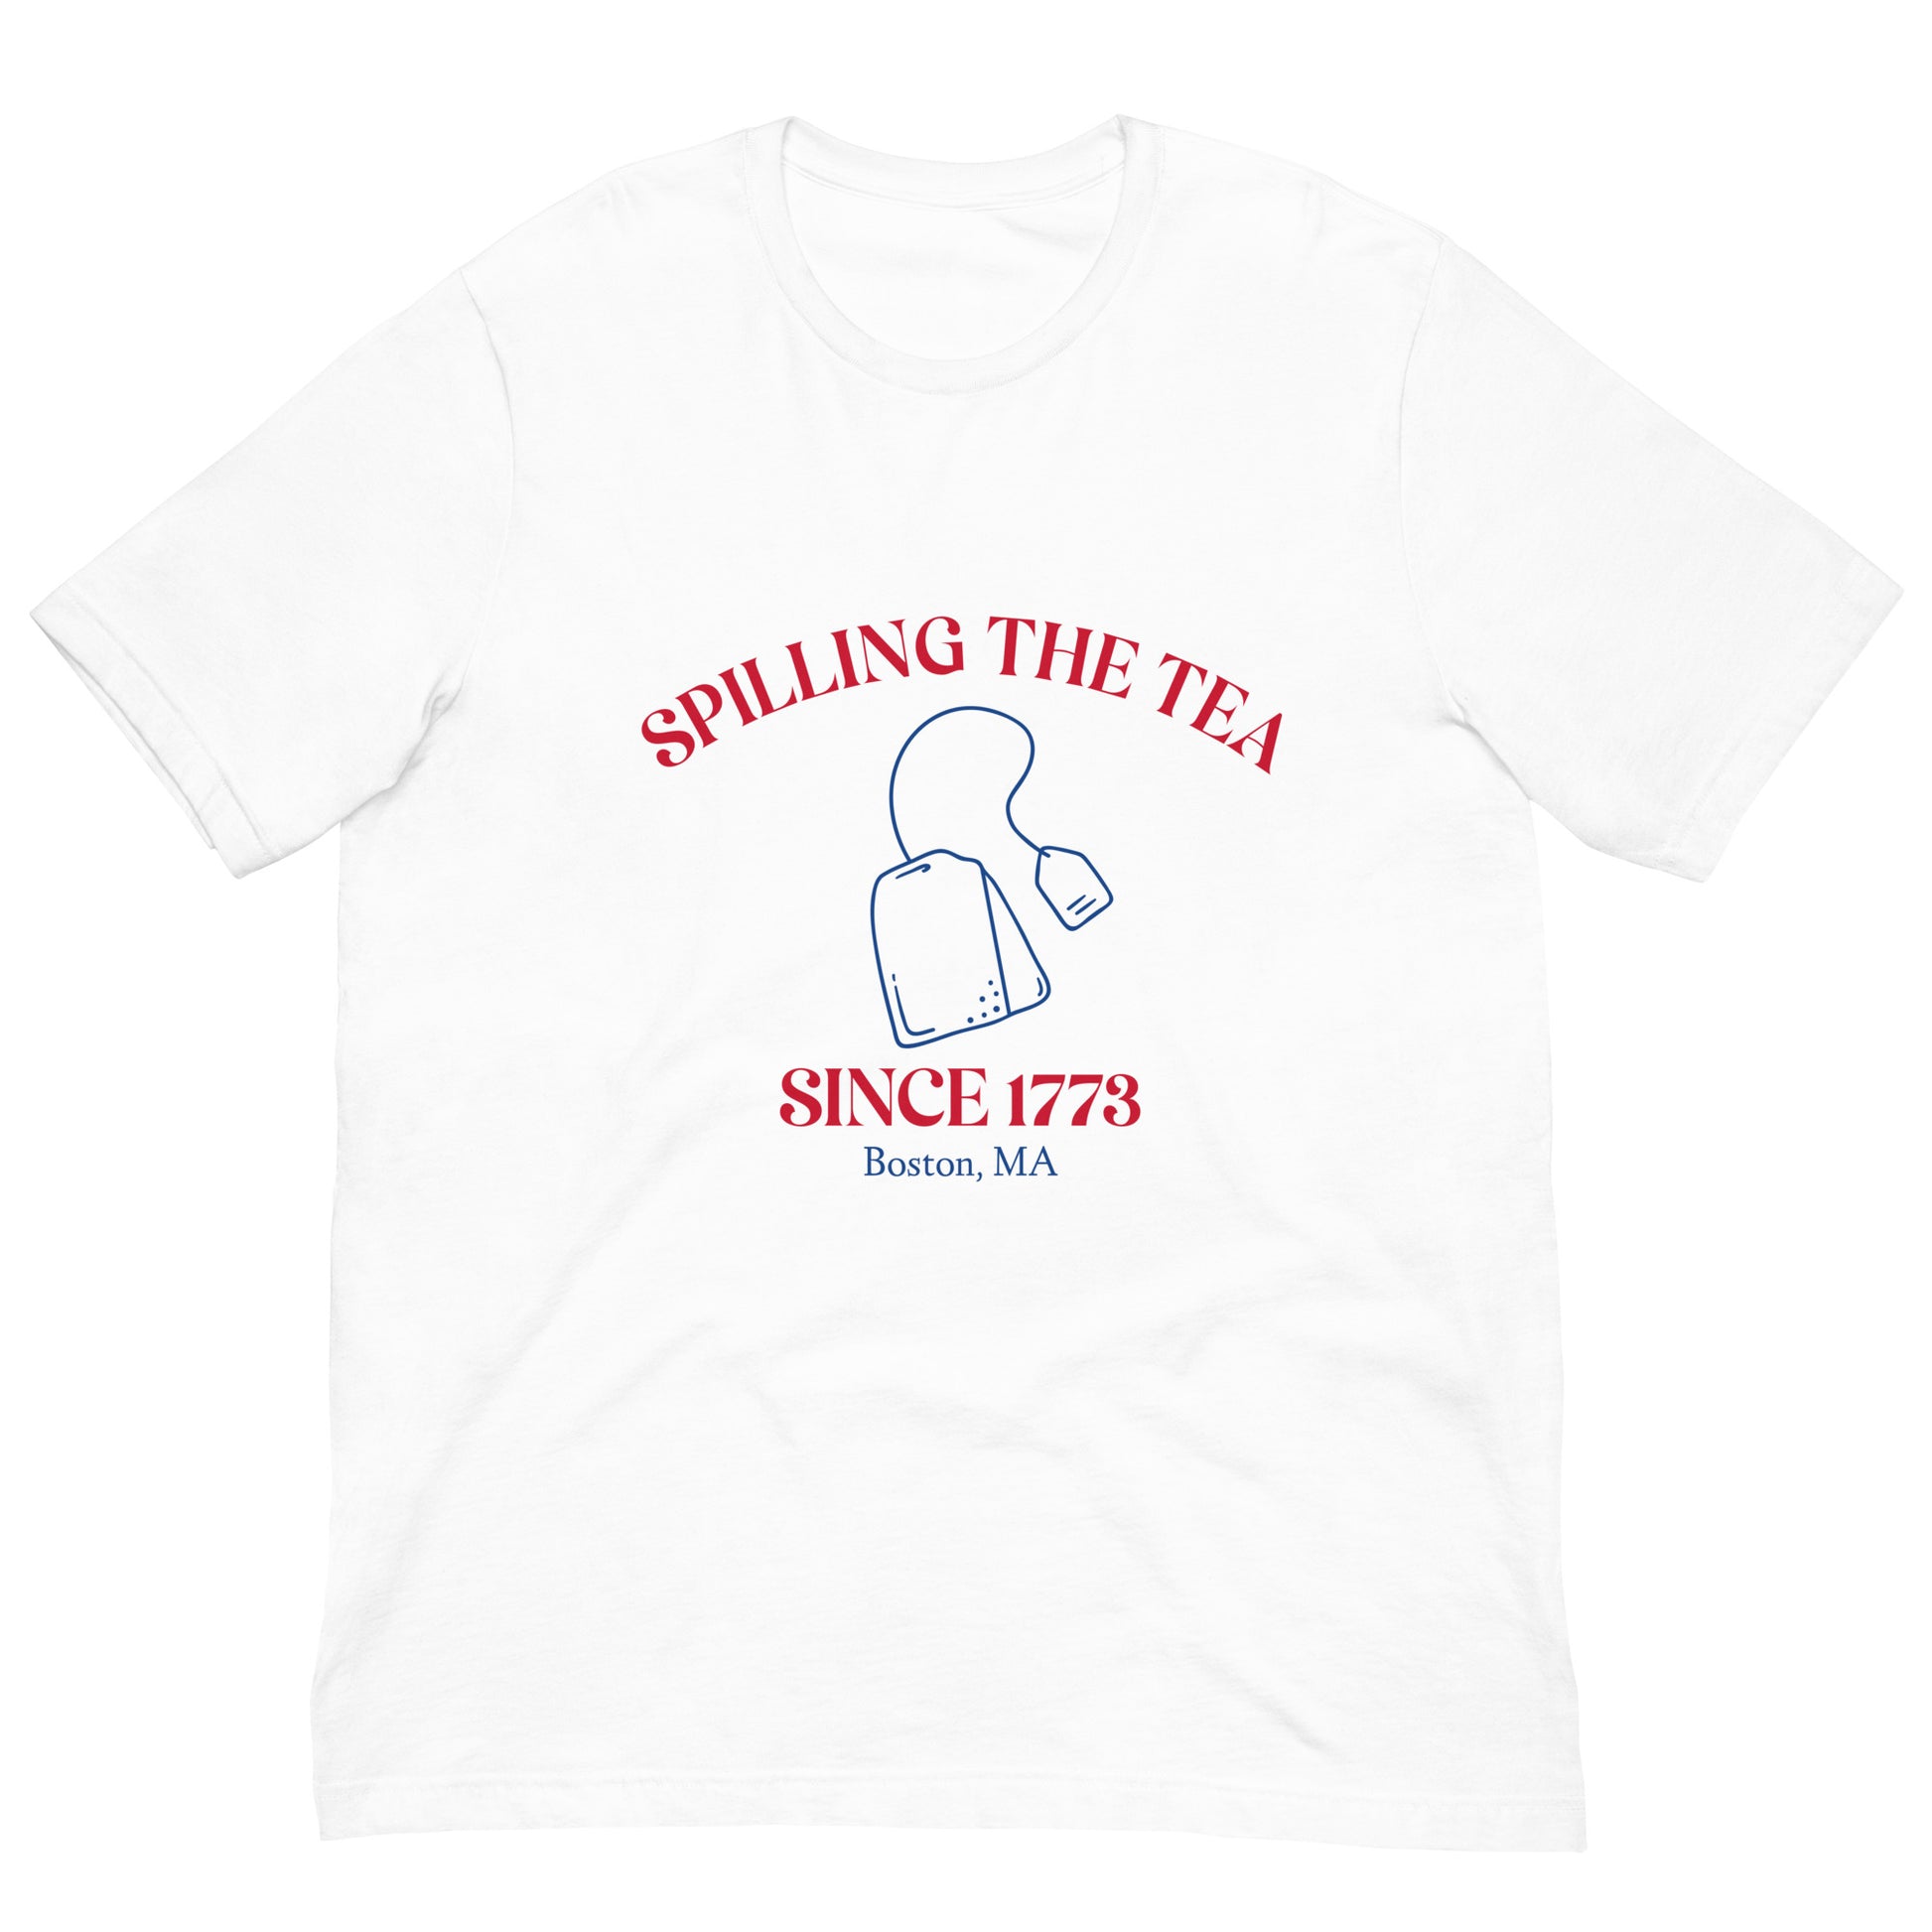 white tshirt that say "spilling the tea since 1773" in red lettering and "Boston MA" in blue lettering with tea bag graphic in middle